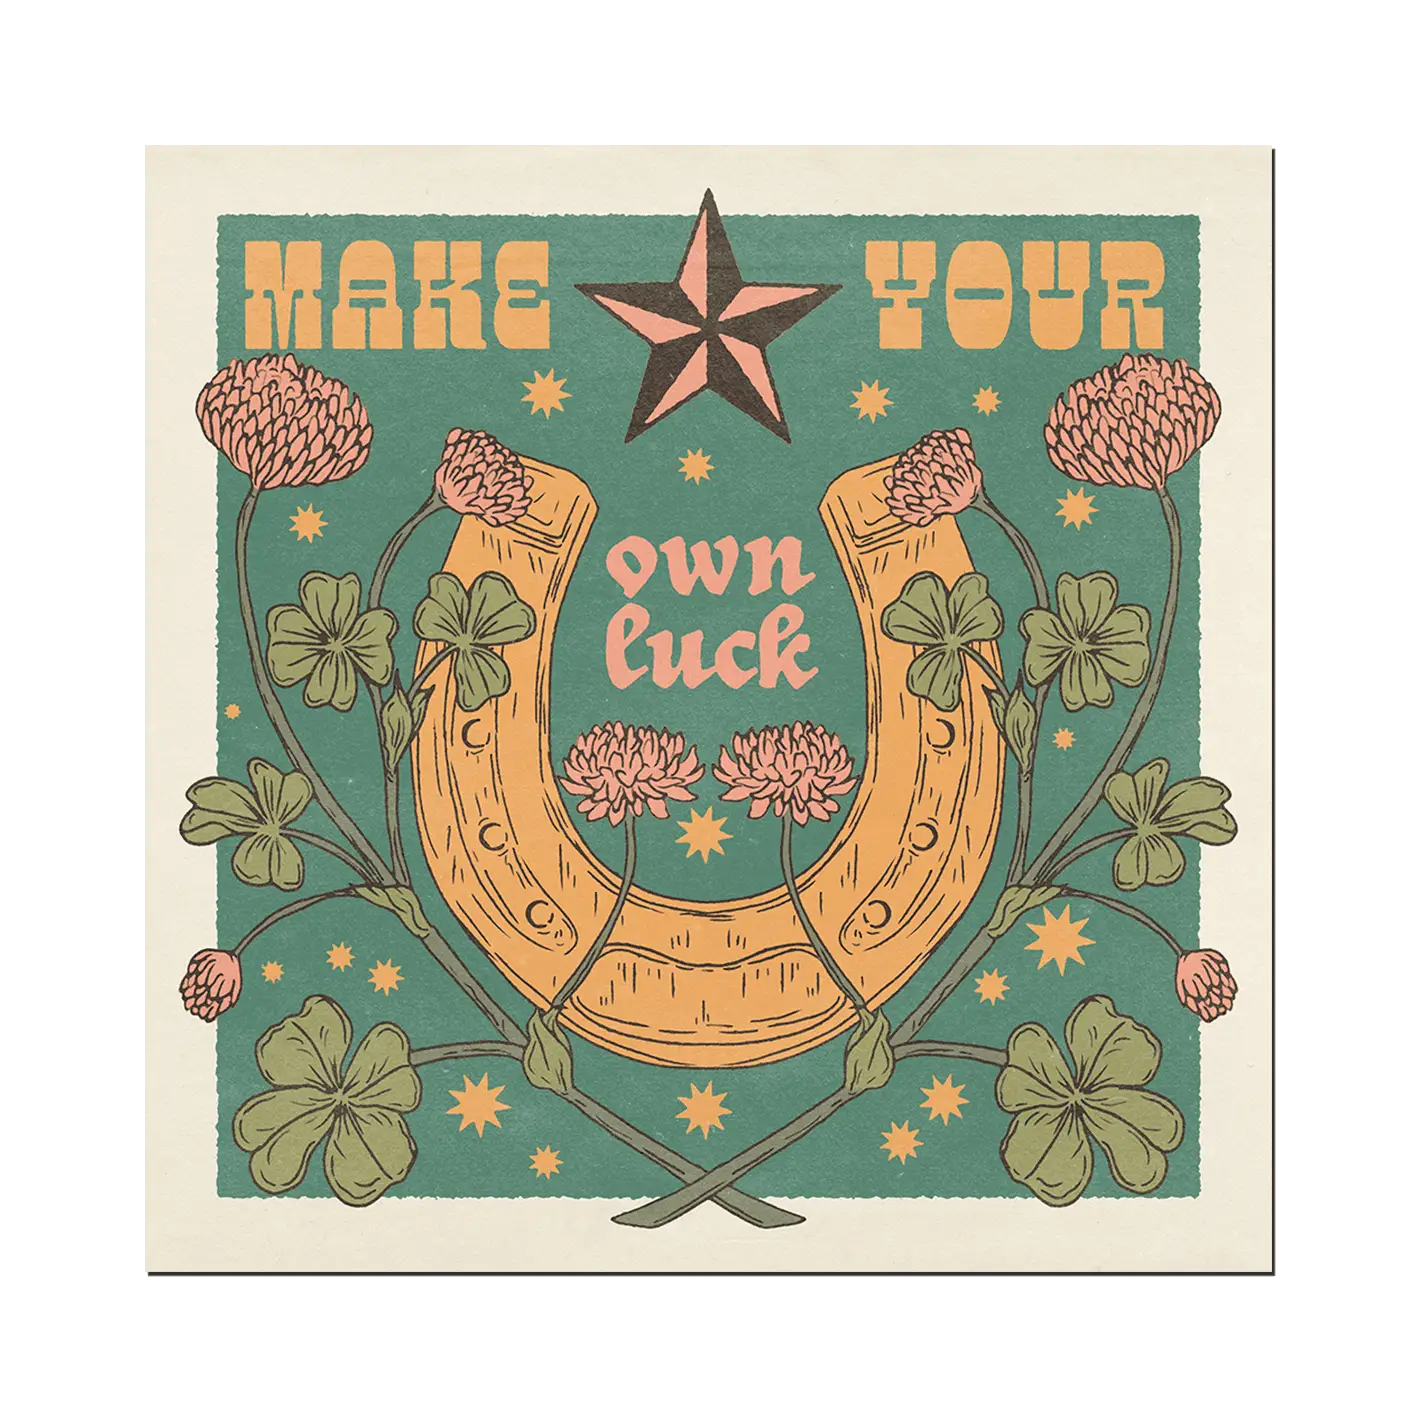 Make Your Own Luck Square Print